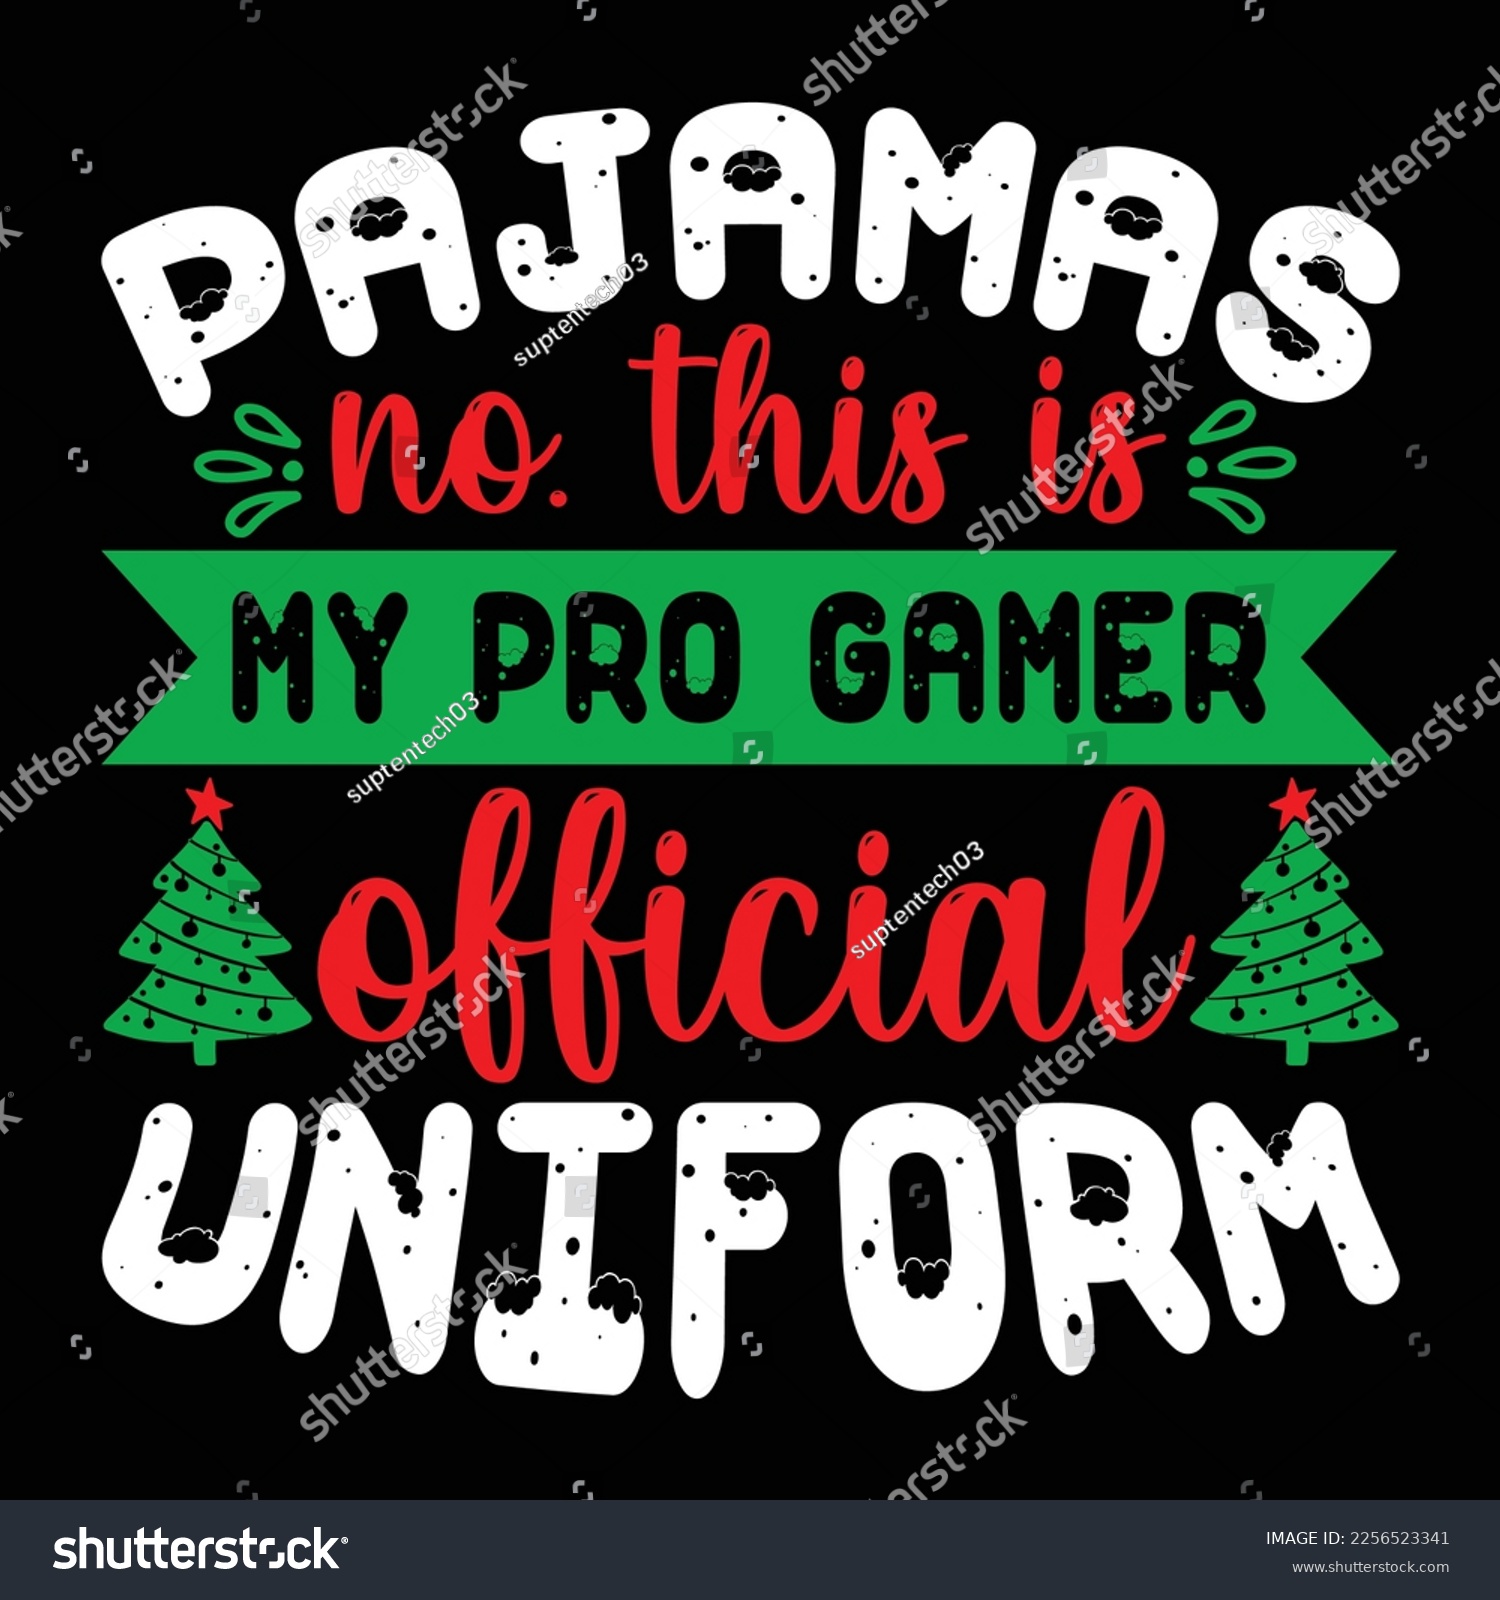 SVG of Pajamas no This is My Pro Gamer Official Uniform, Merry Christmas shirts Print Template, Xmas Ugly Snow Santa Clouse New Year Holiday Candy Santa Hat vector illustration for Christmas hand lettered svg